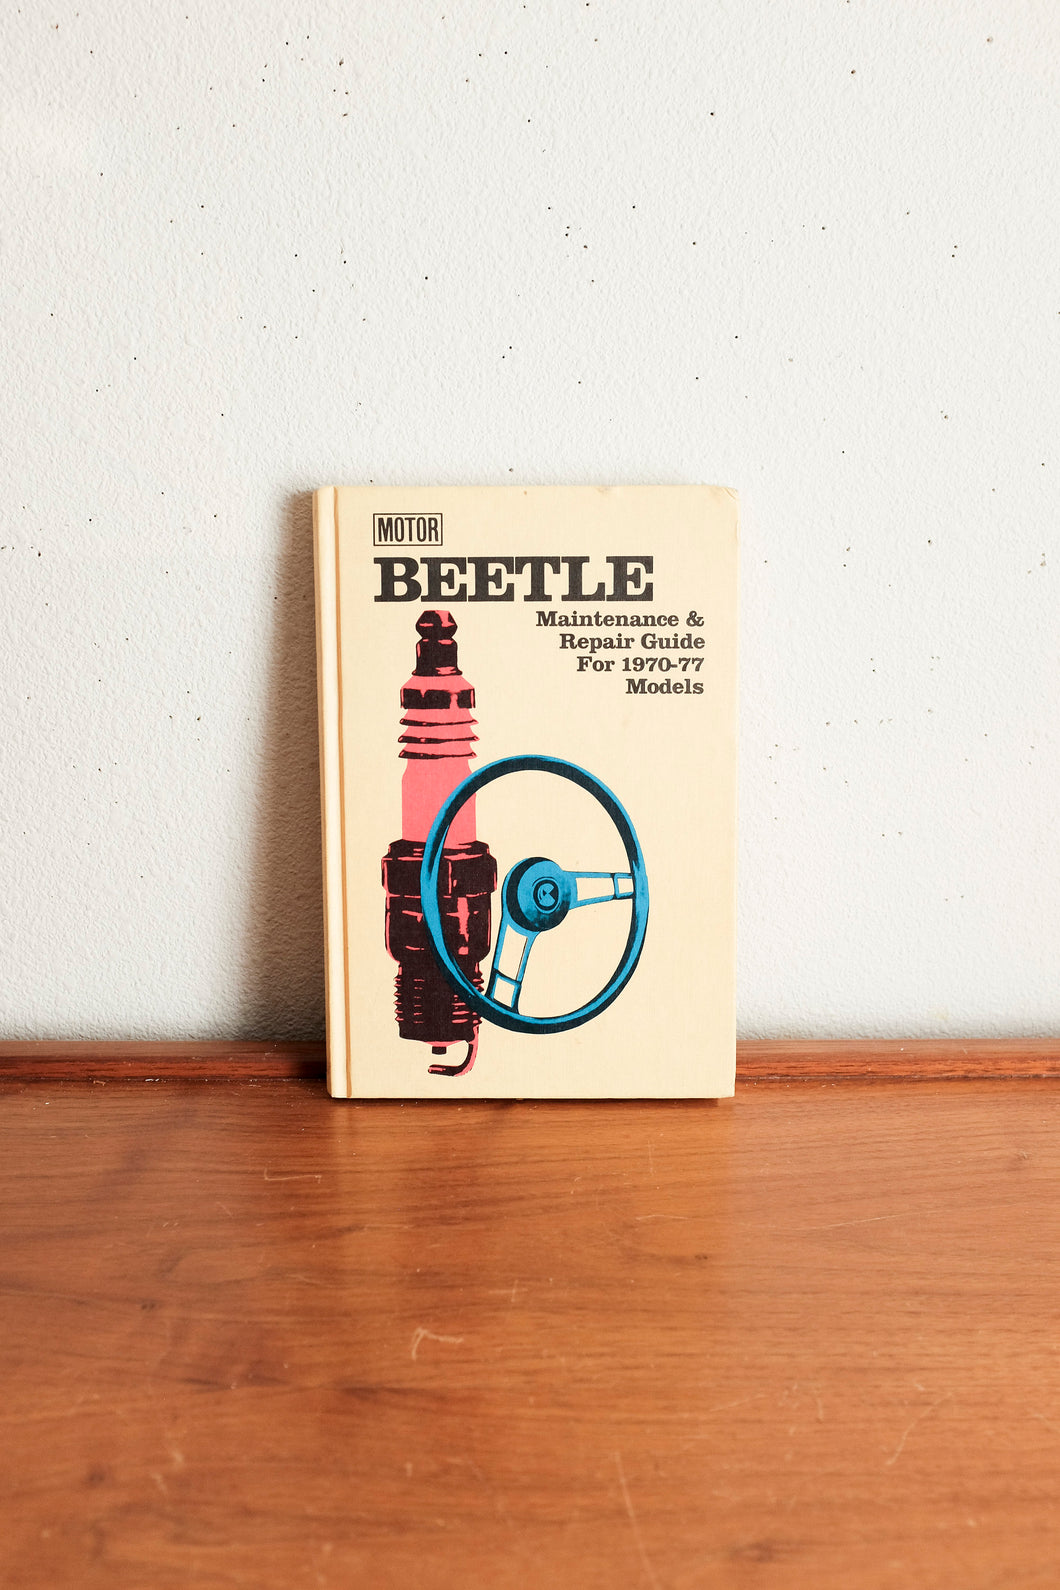 The Beetle Maintenance and repair guide for 1970-77